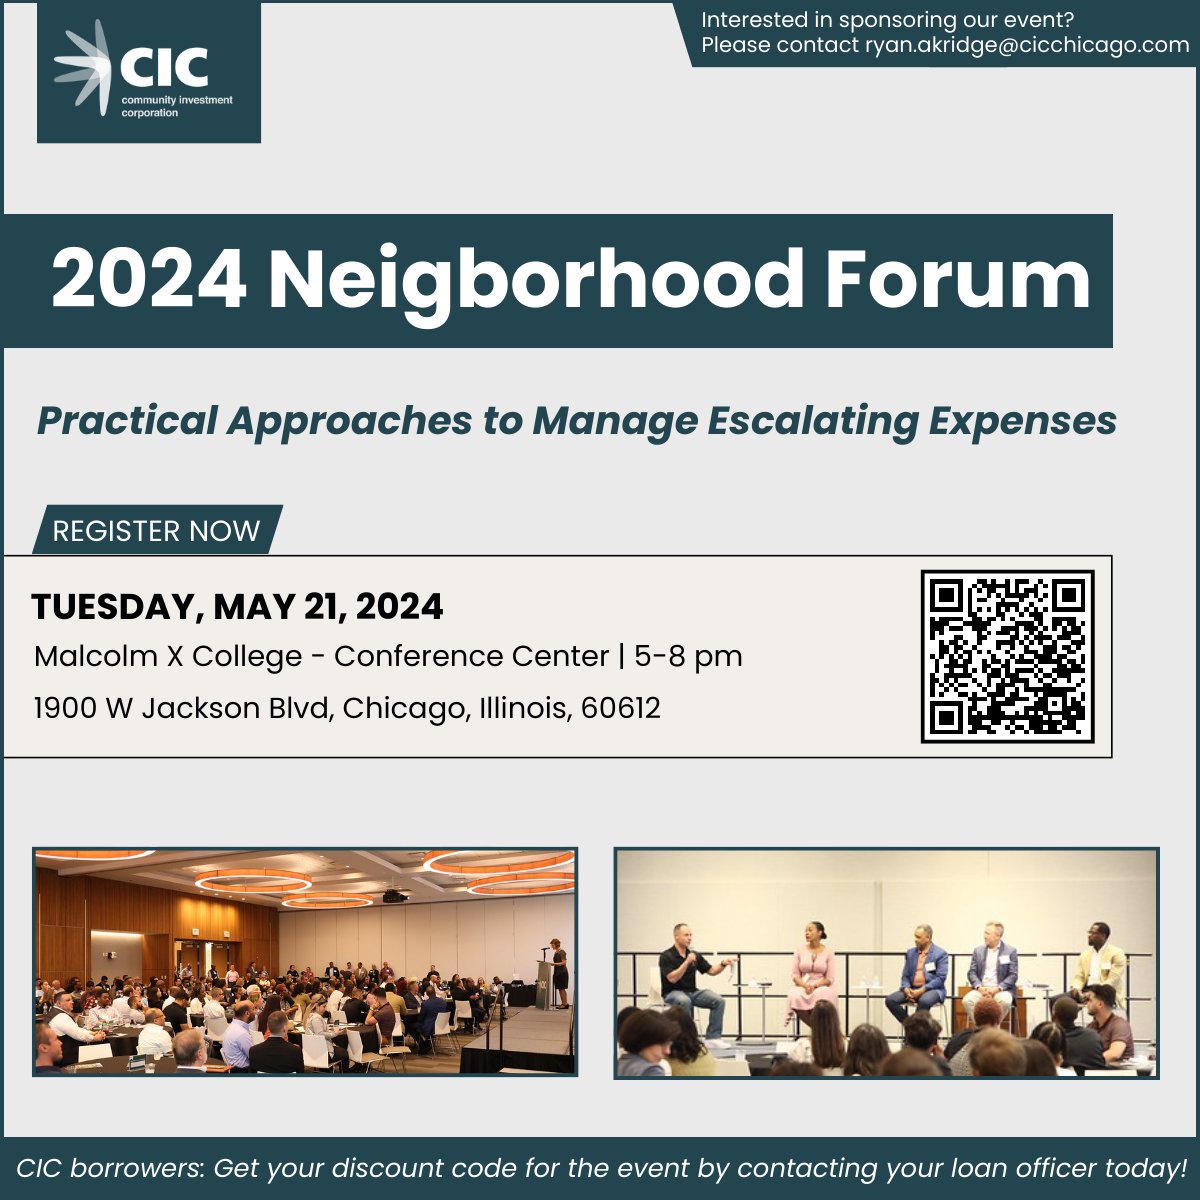 Join CIC for an engaging discussion at our 2024 Neighborhood Forum! Make new connections with over 200 developers, owners, managers, brokers, & lenders. The event includes a panel discussion followed by a networking reception. Register today! bit.ly/3TM4sU7